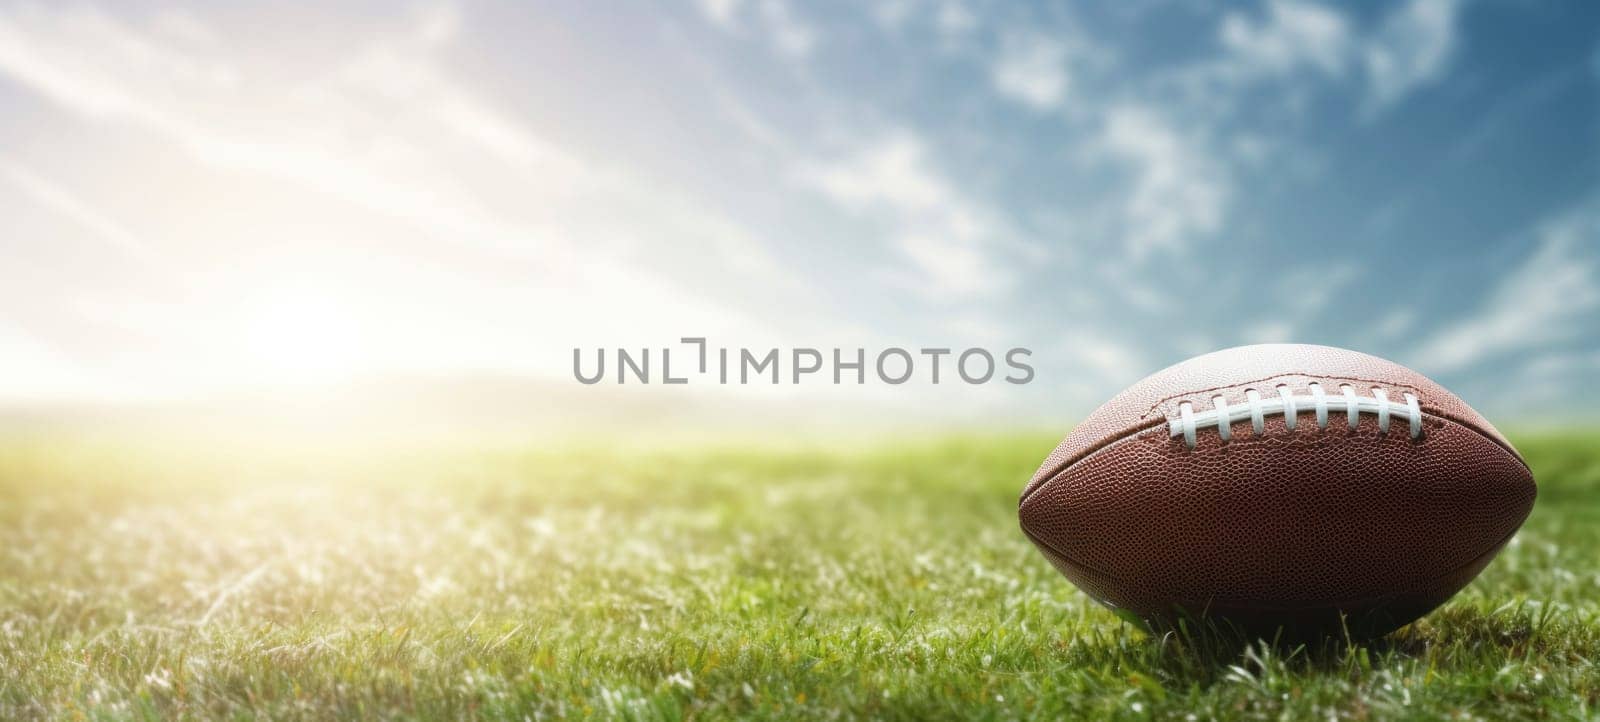 An American football placed on a green grass field with a bright and sunny sky in the background, symbolizing sports and outdoor activities.